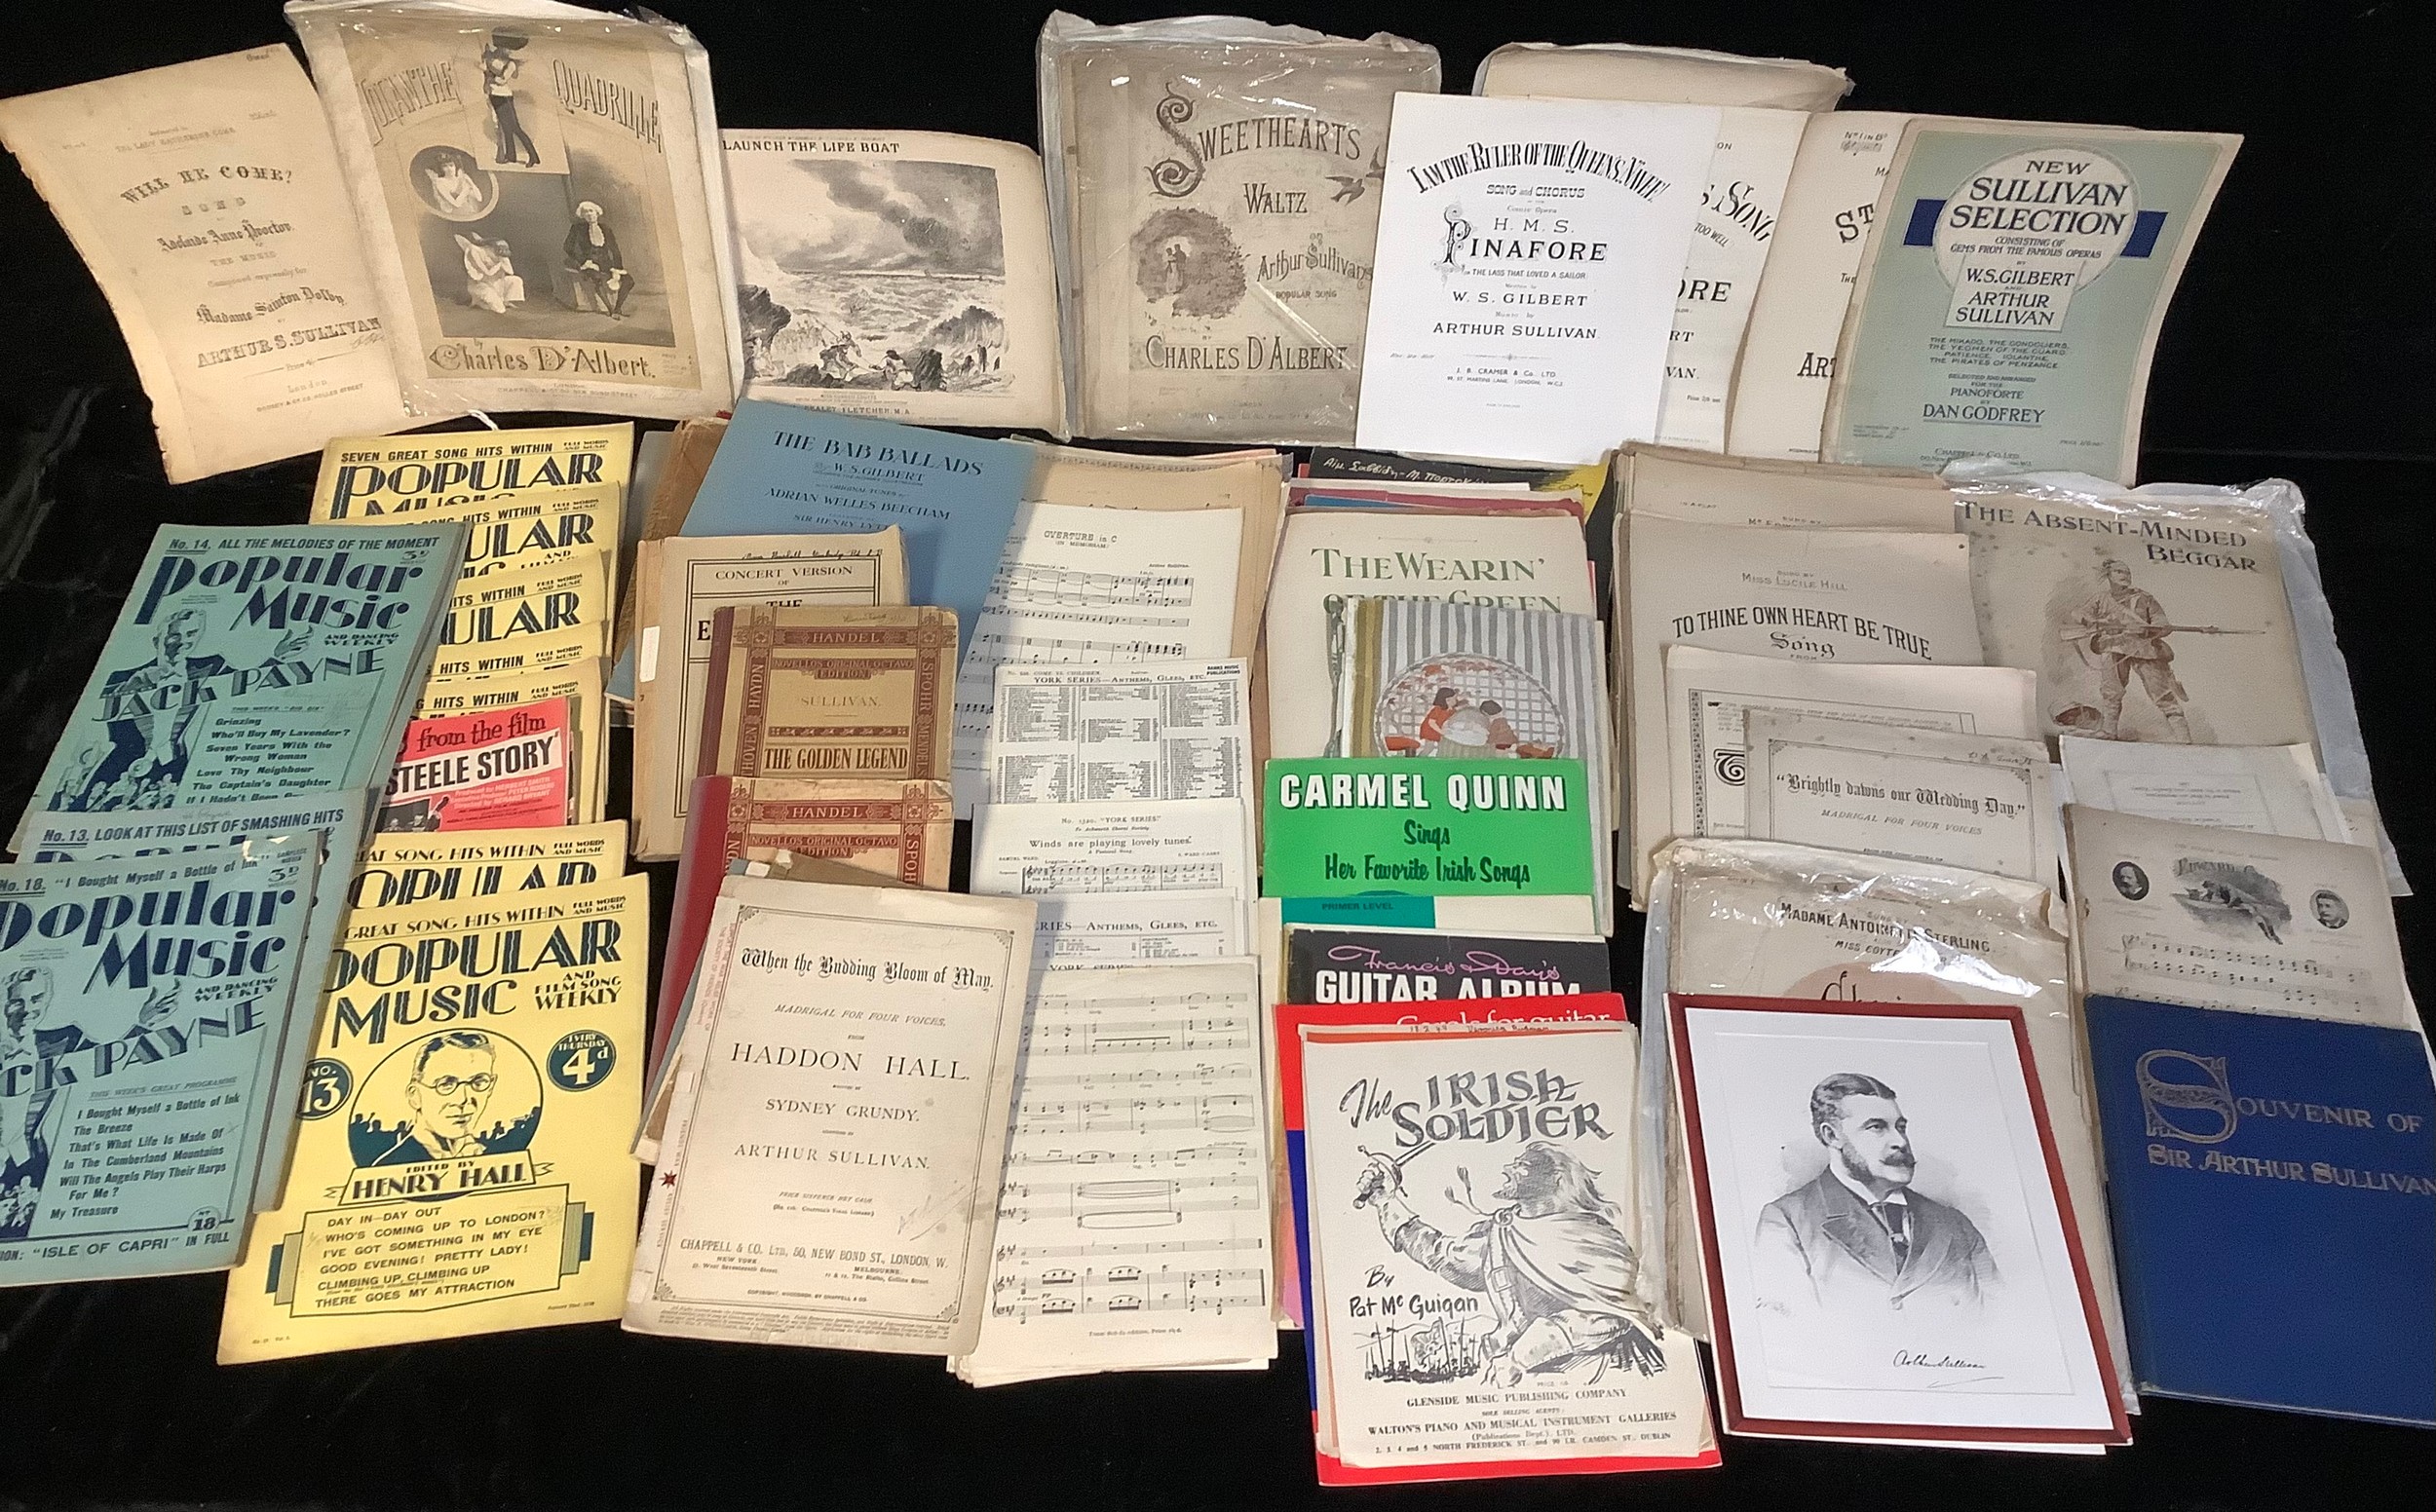 A large collection of sheet music, scores, books, relating to Gilbert and Sullivan and others